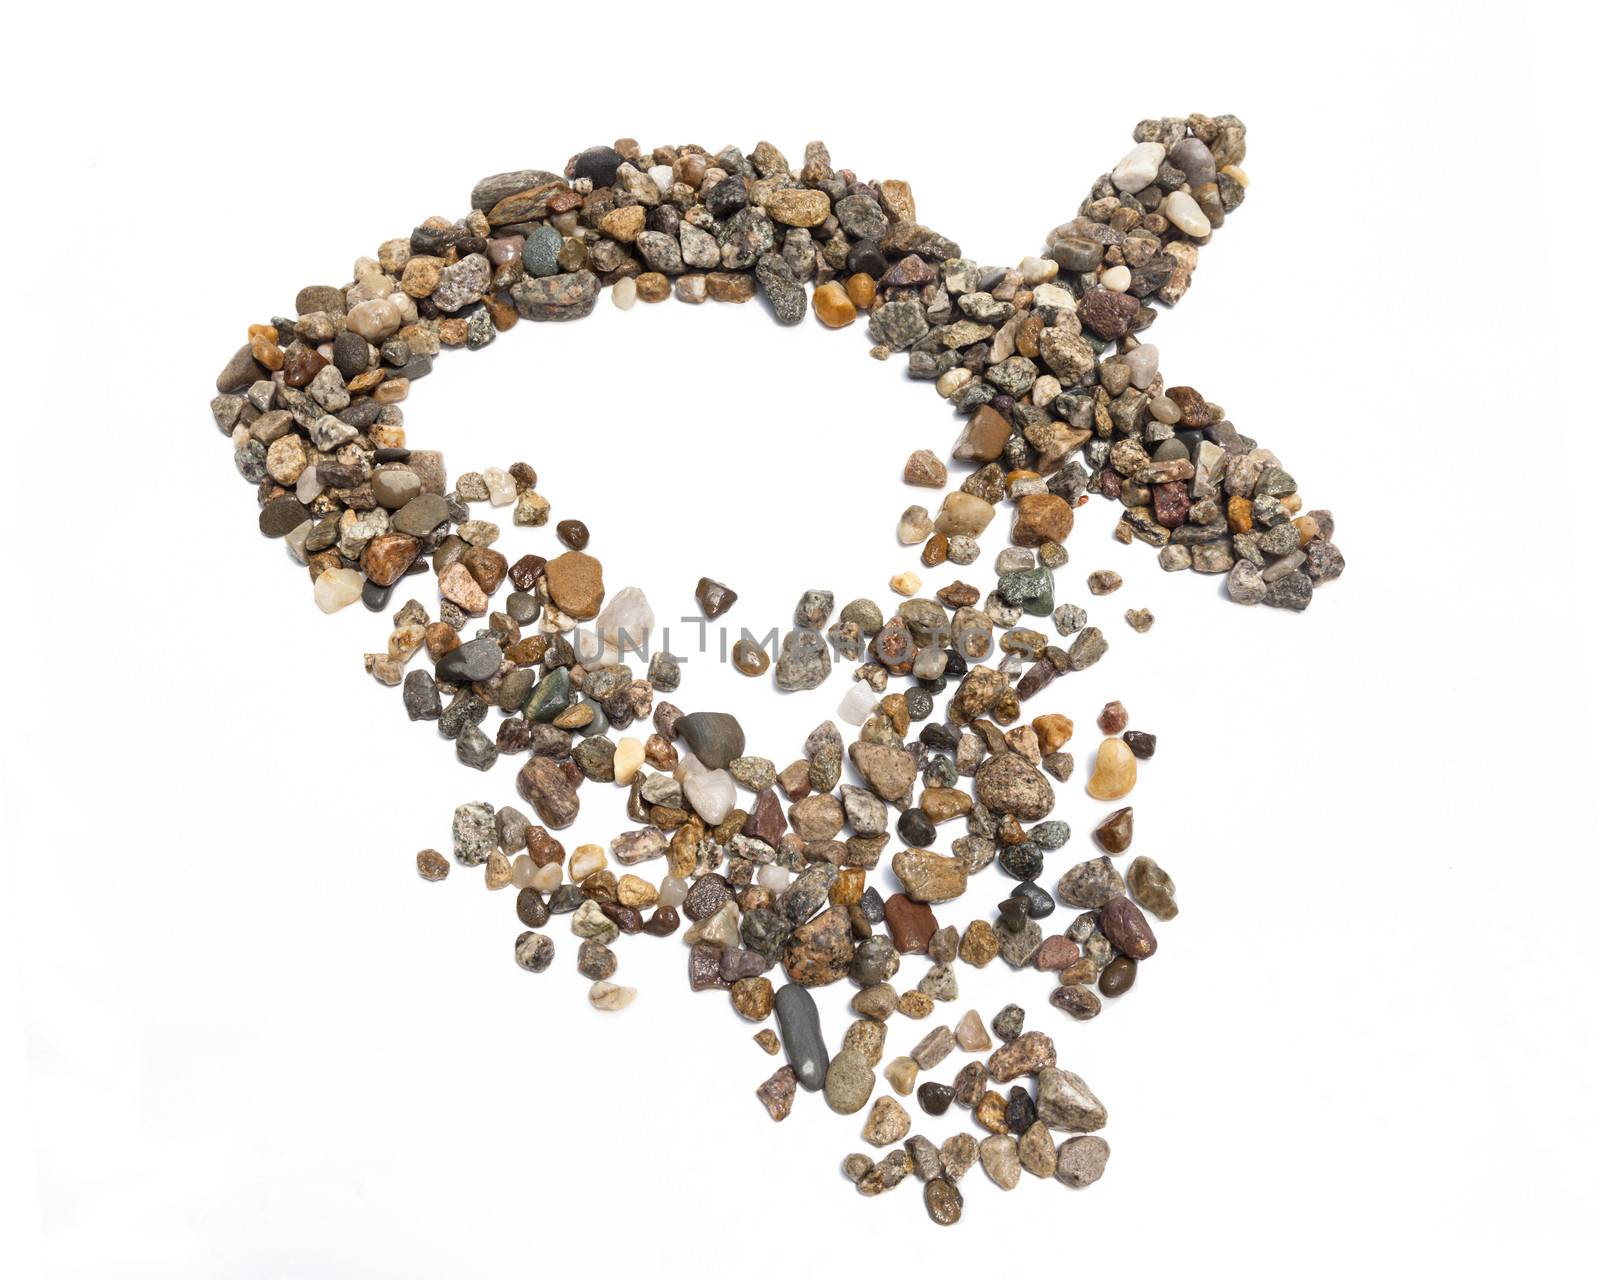 An ichthus made of stones against a white background.